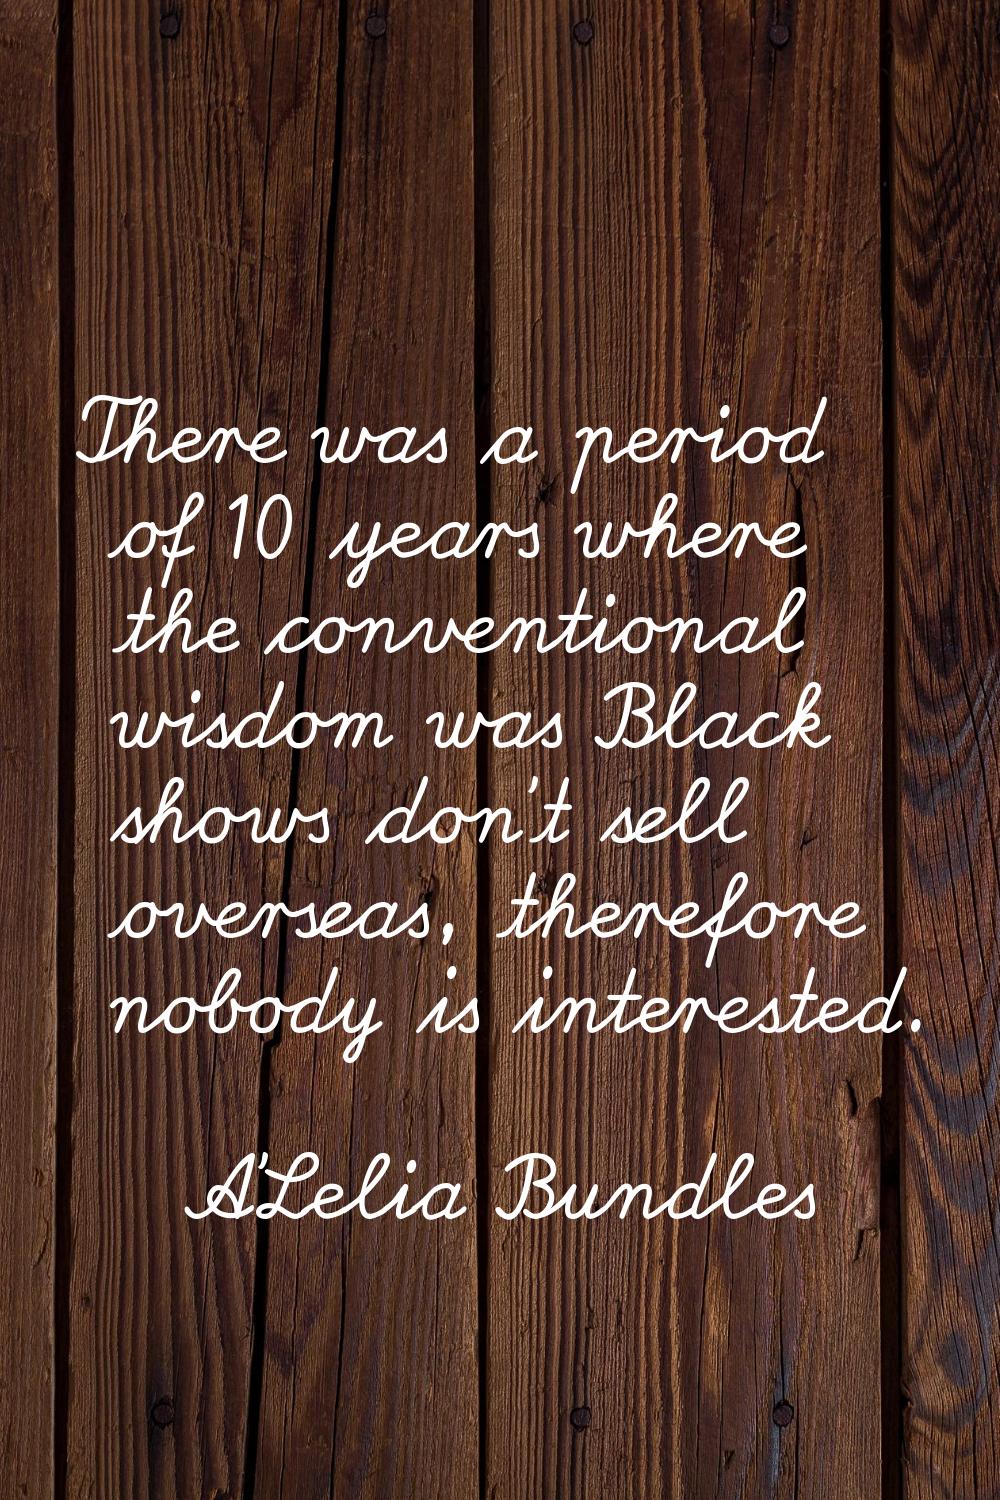 There was a period of 10 years where the conventional wisdom was Black shows don't sell overseas, t